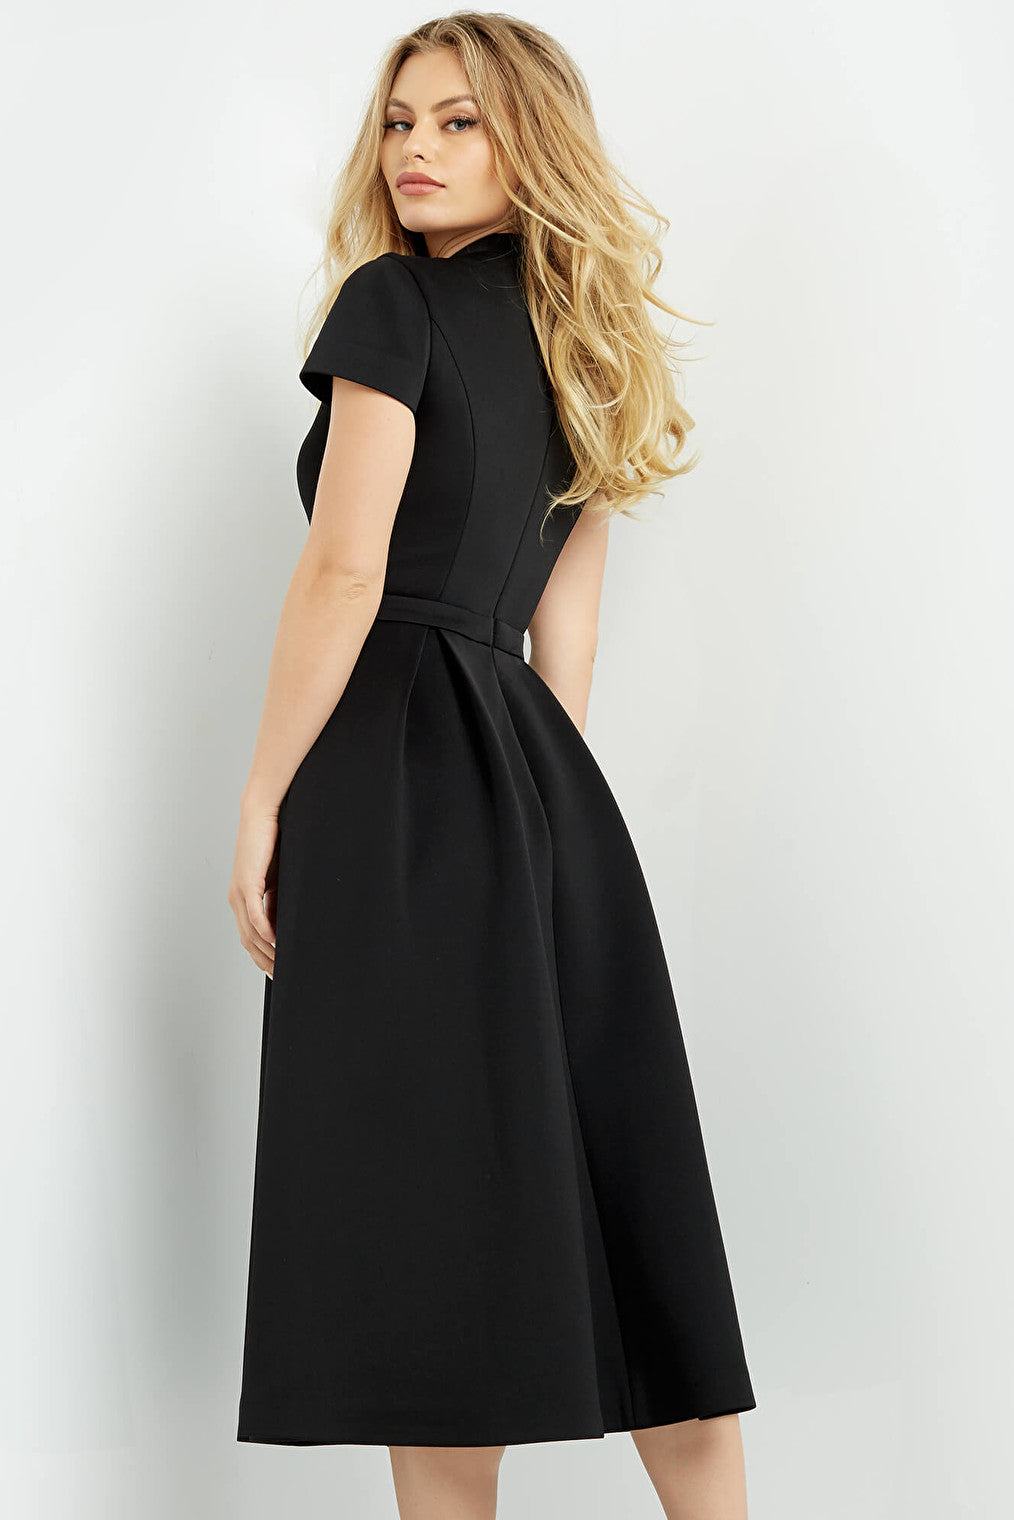 fit and flare black dress 06782